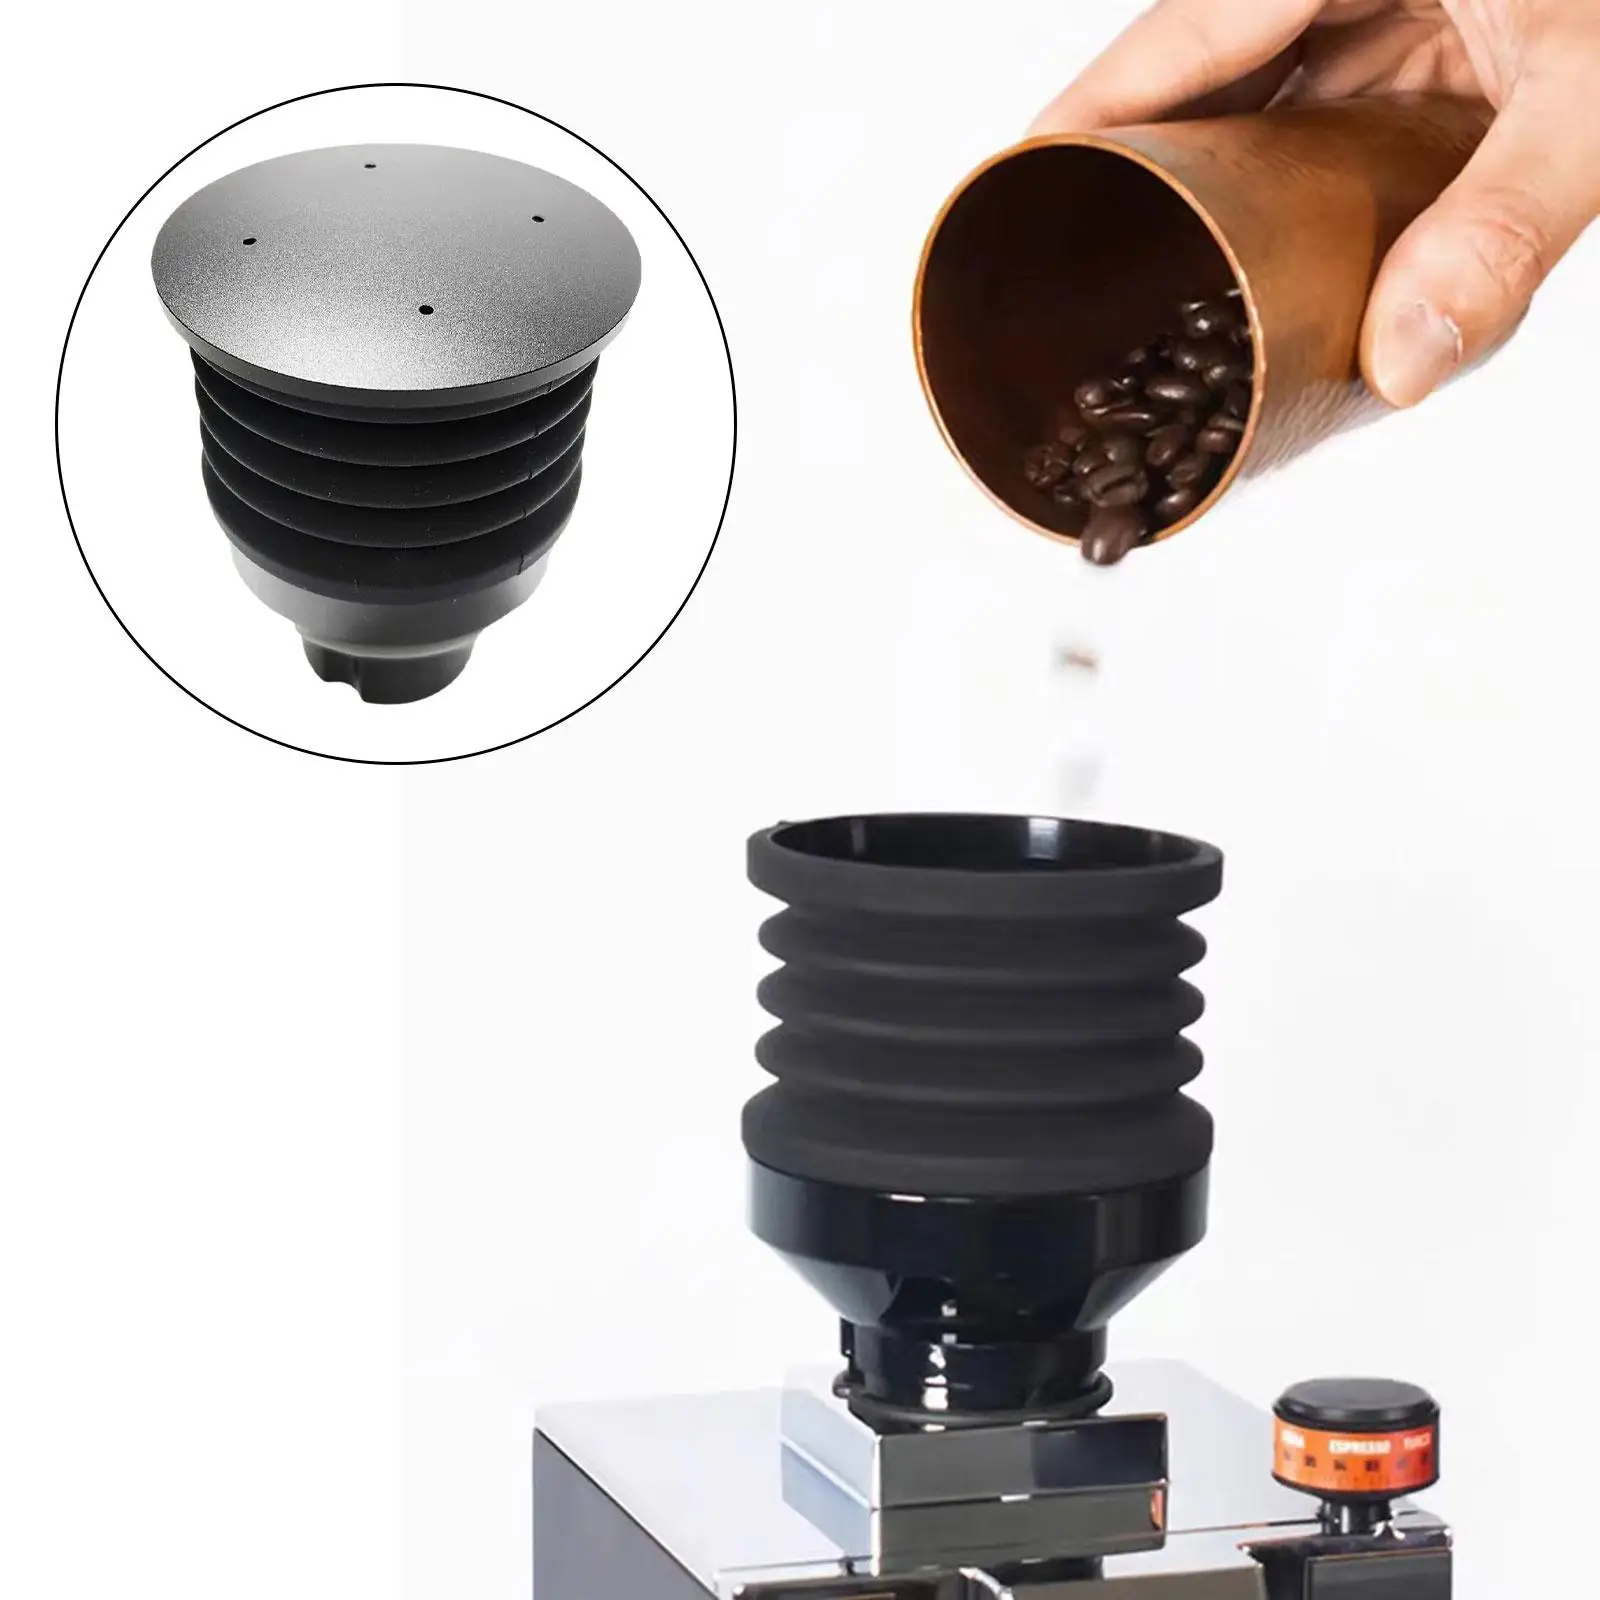 Grinder Blowing Bean Bin Silicone 140G Funnel Coffee Cleaning Accessories Grinder Single Dose Replacements Accessory Coffee Make